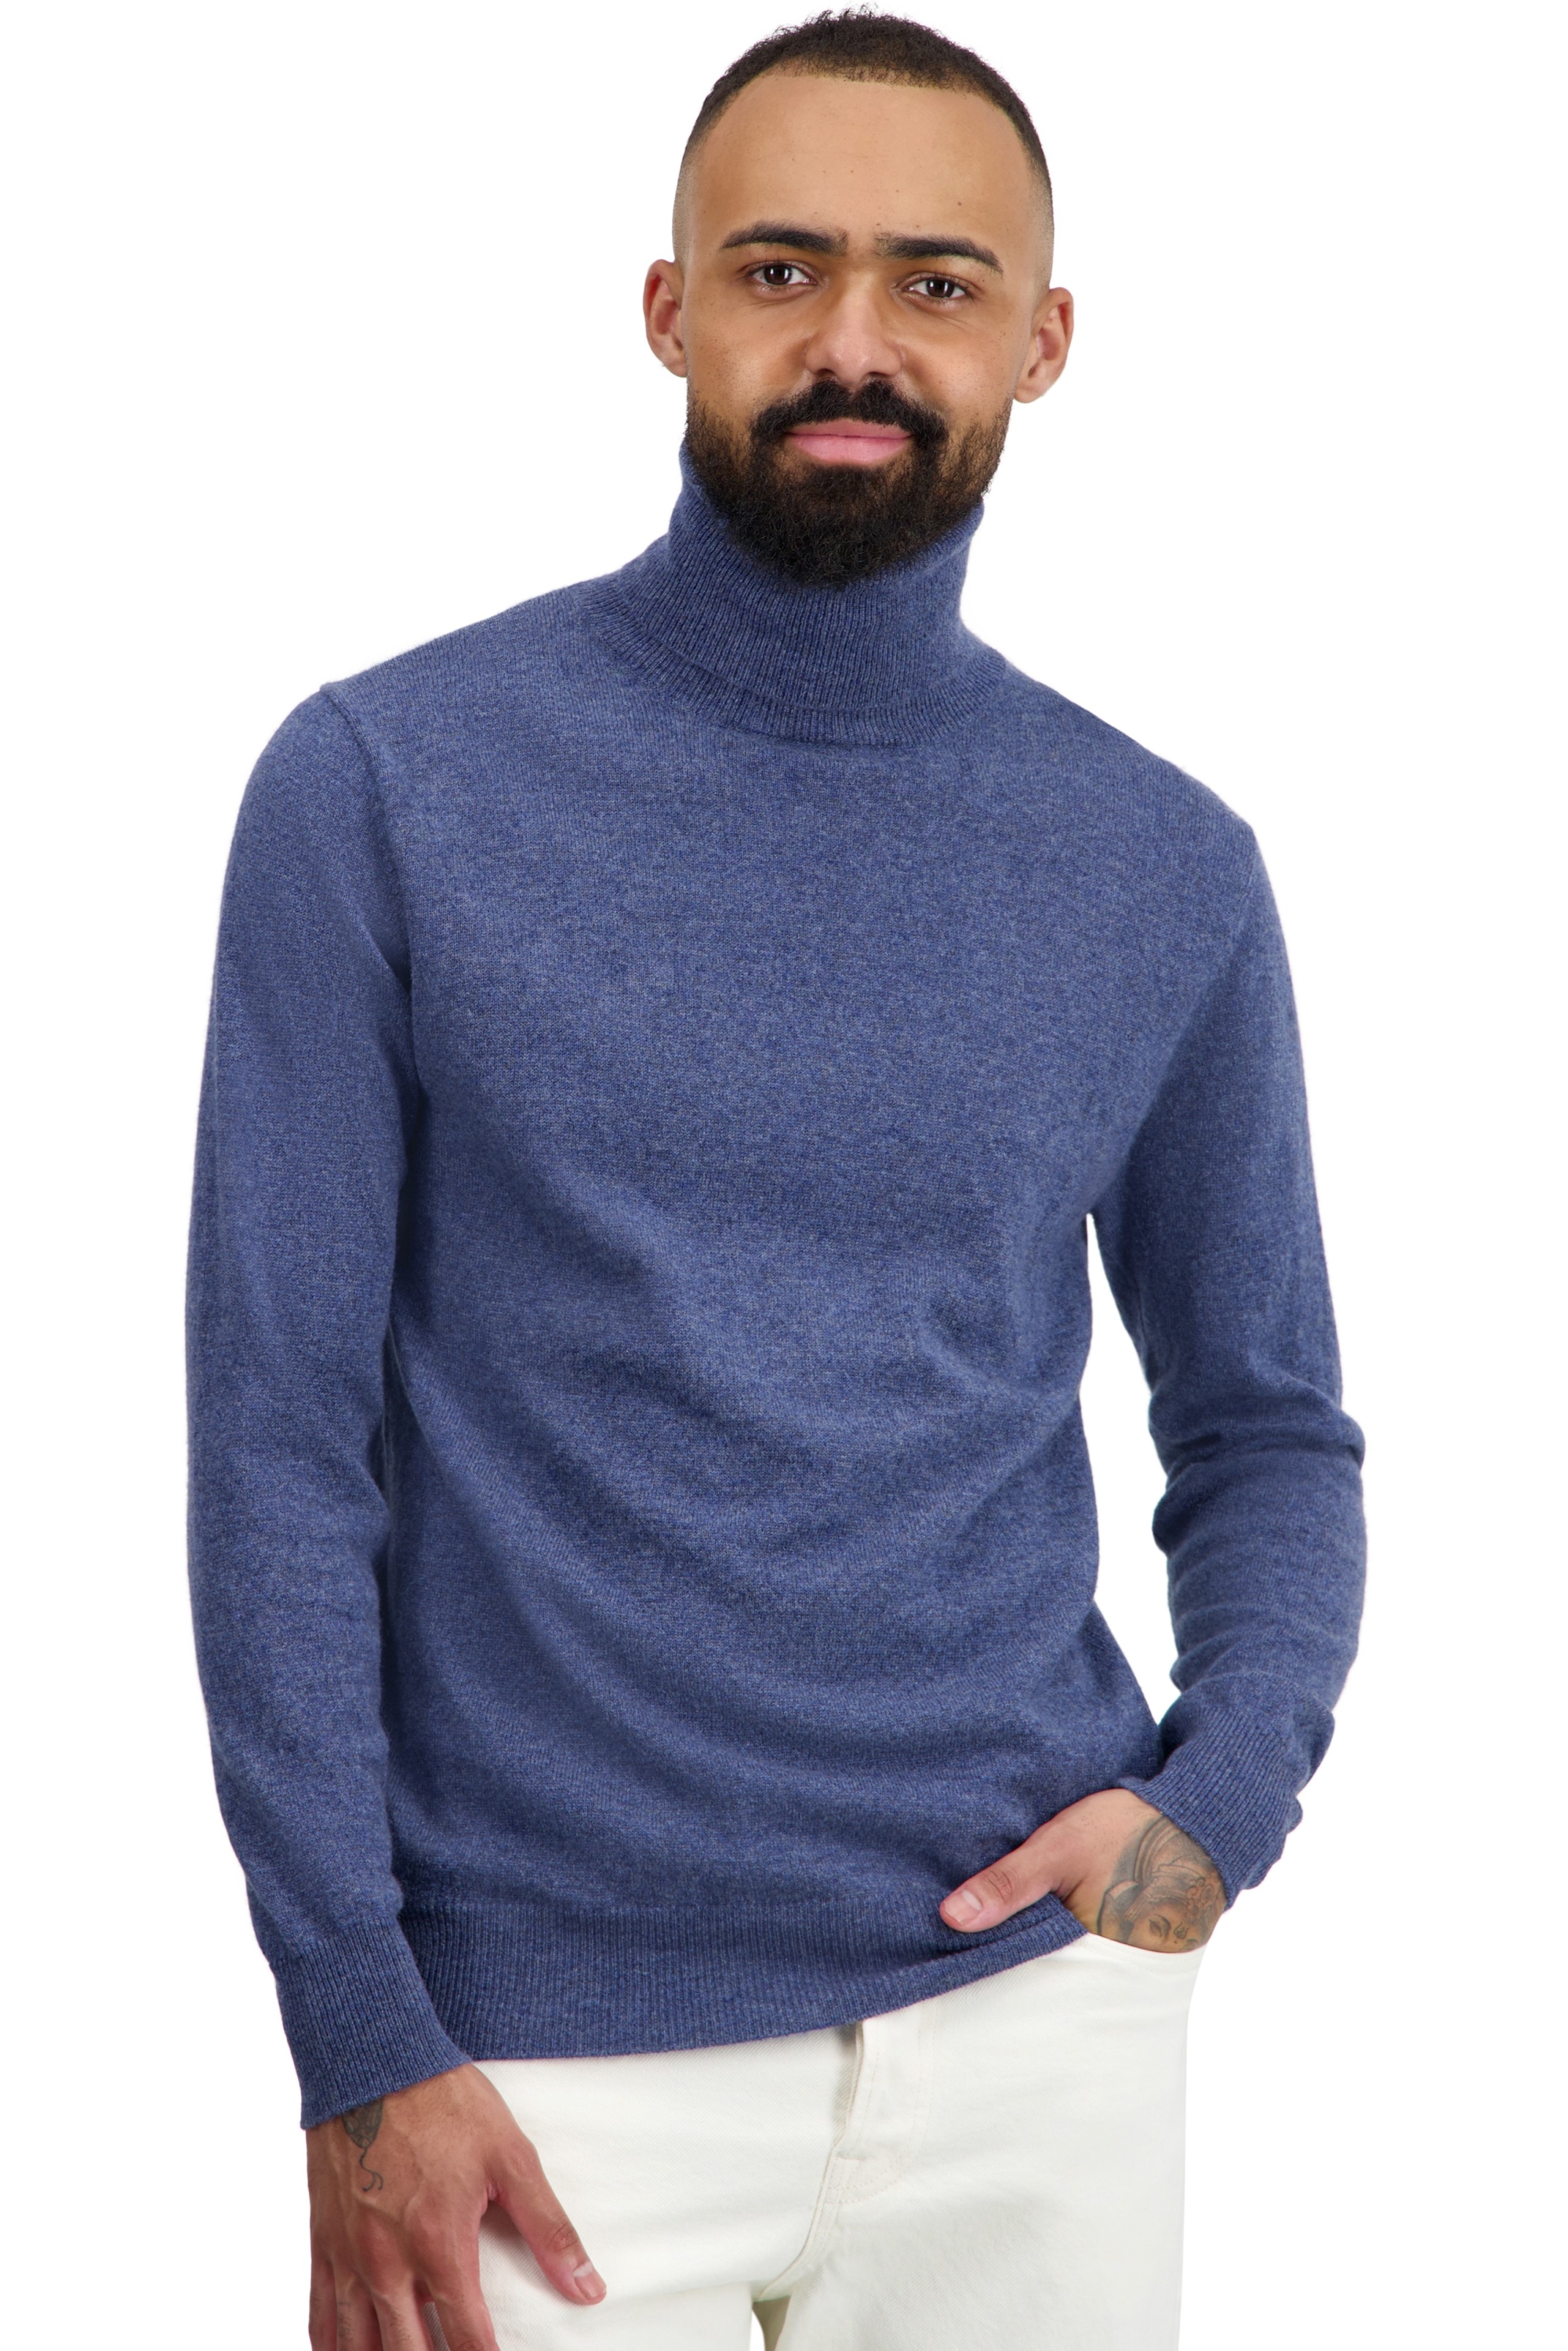 Cachemire petits prix homme tarry first nordic blue m